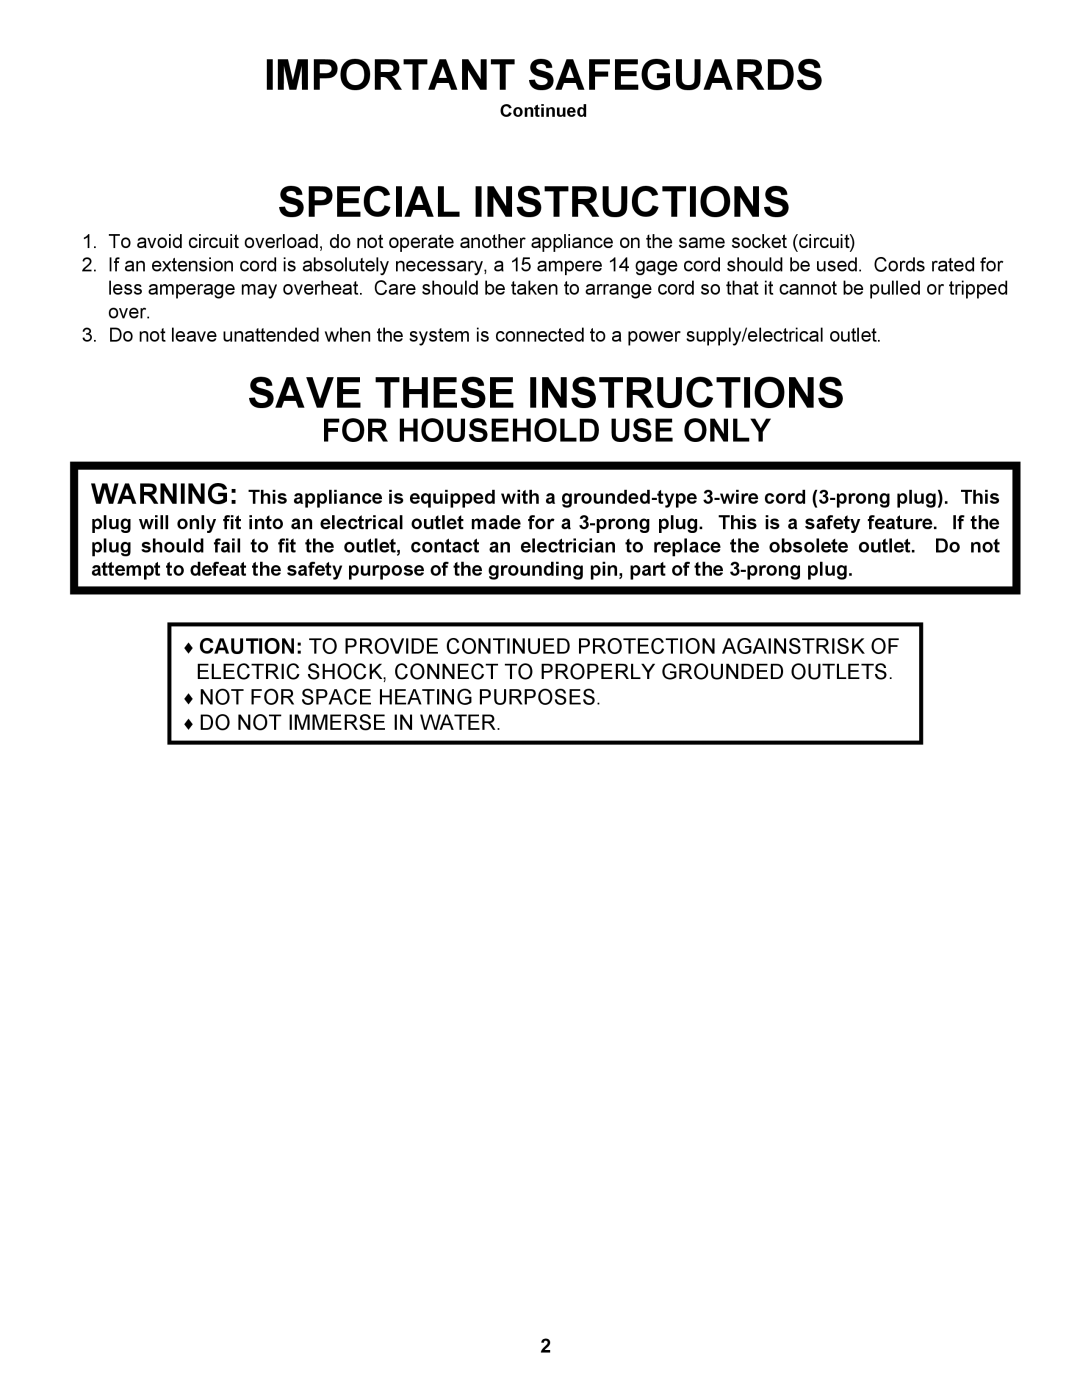 Euro-Pro SC412 warranty Special Instructions, For Household Use Only, Important Safeguards, Save These Instructions 